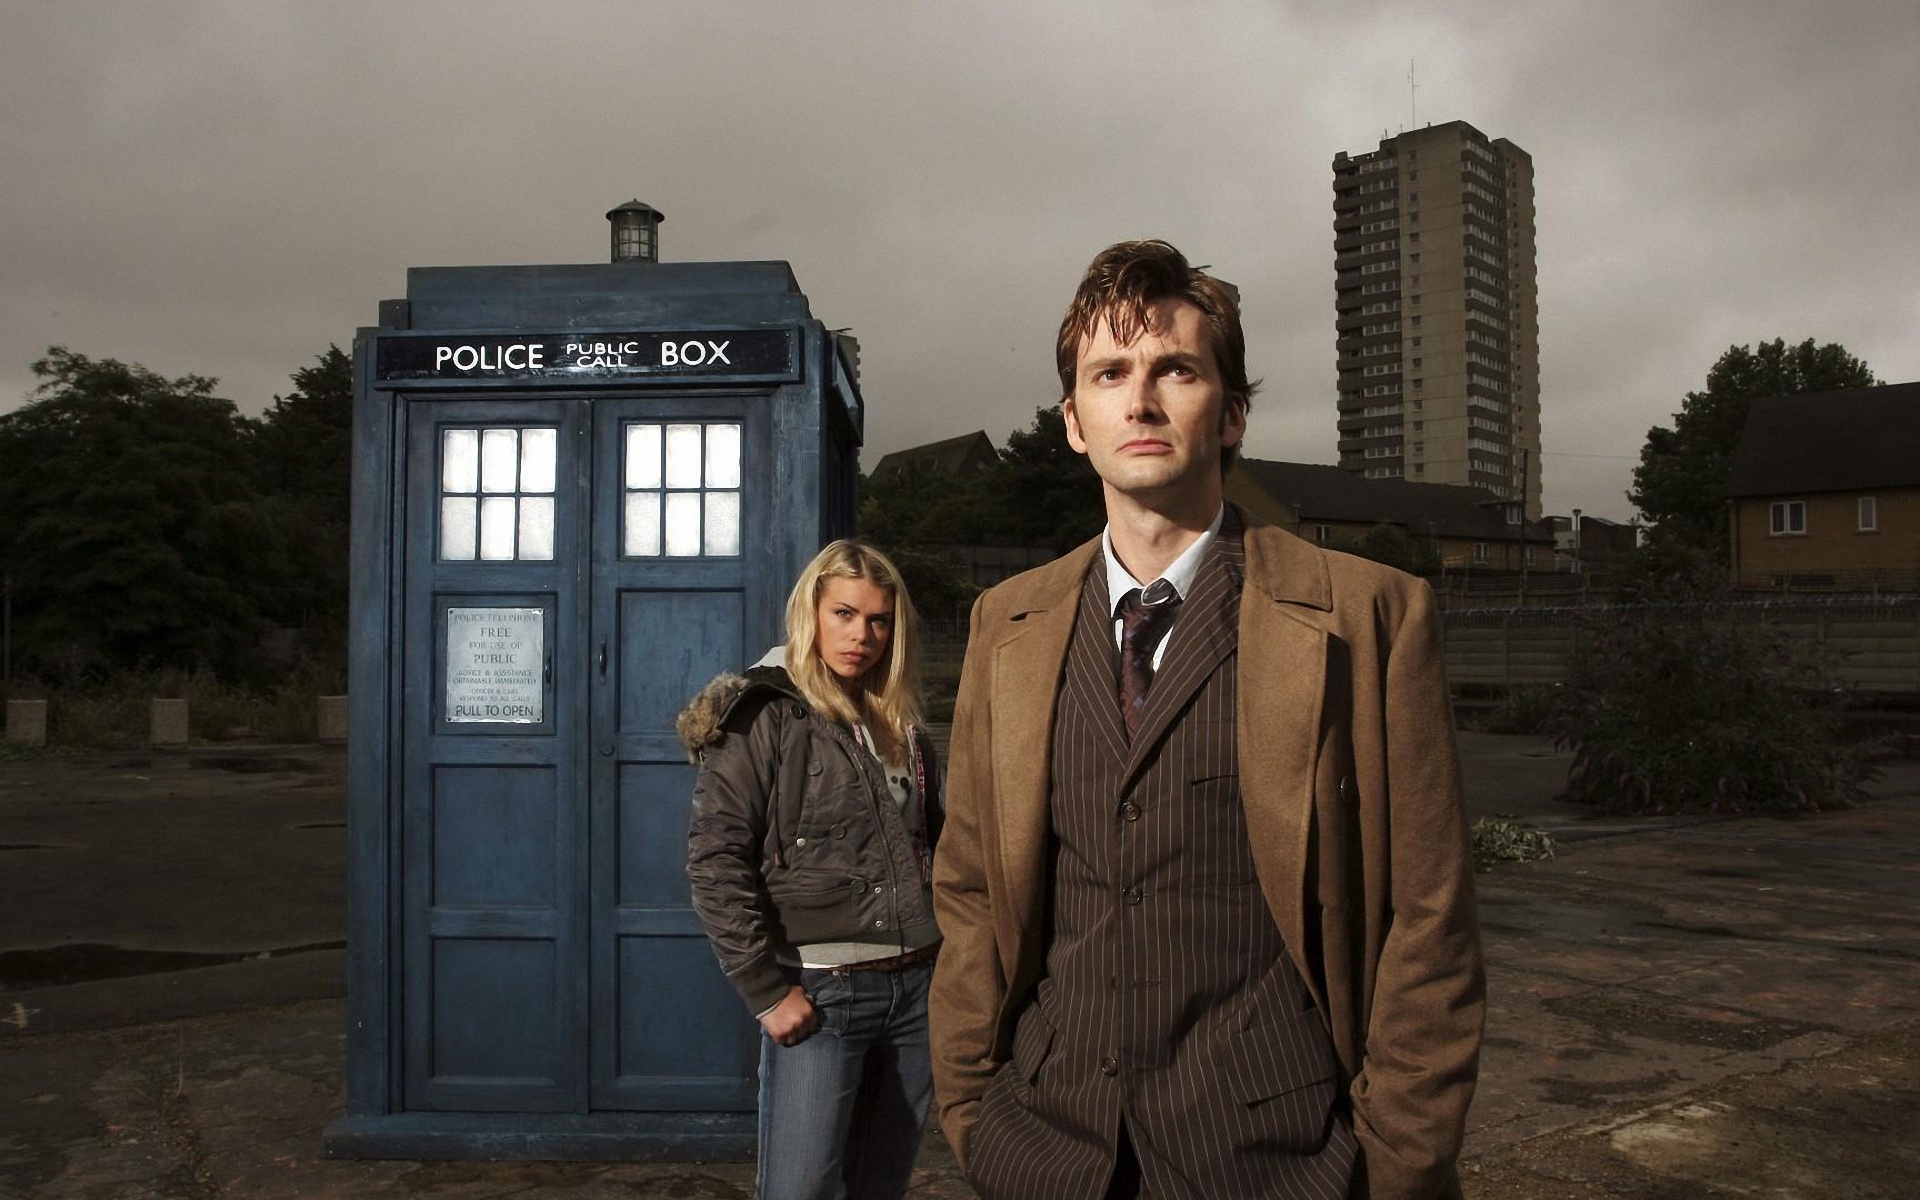 doctor who s08e10 tpb torrents